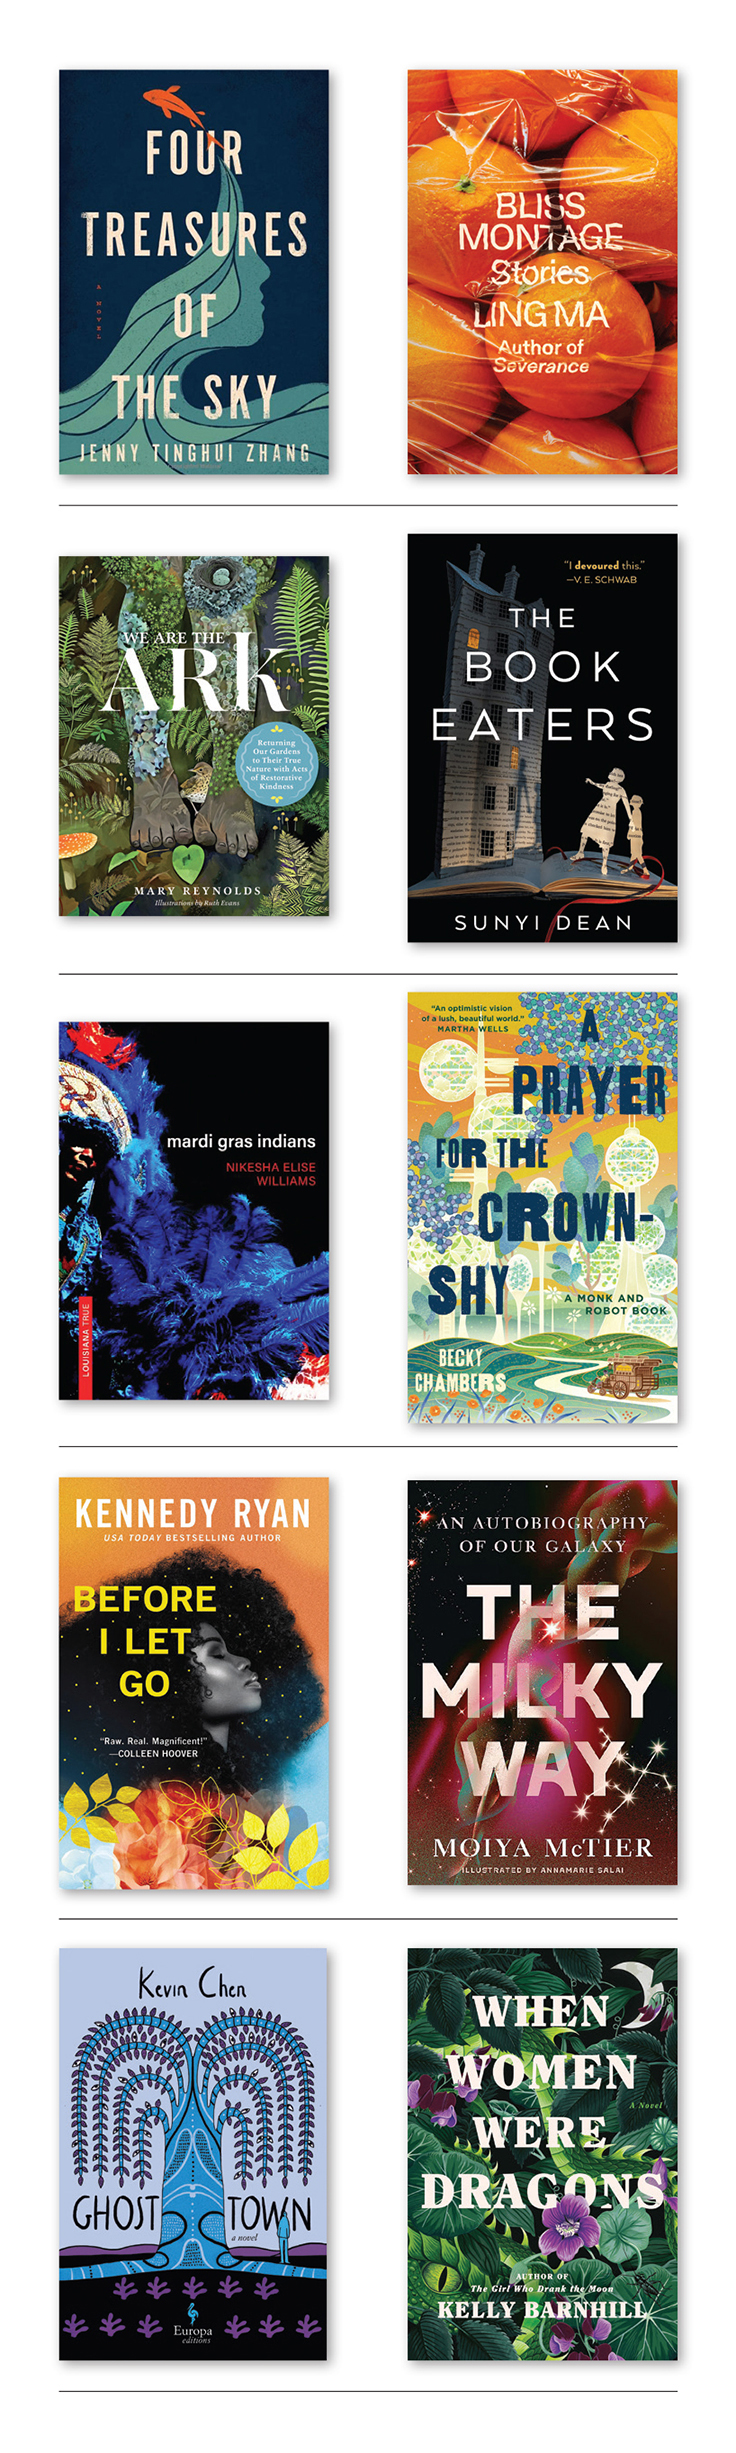 Best Book Covers, Ryan, Kennedy Before I Let Go Forever 9781538706794 Chen, Kevin Ghost Town Europa Editions 9781609457983 Reynolds, Mary We Are the ARK Timber Press 9781643261782 Williams, Nikesha Mardi Gras Indians LSU Press 9780807178706 Ma, Ling Bliss Montage Farrar, Straus and Giroux 9780374293512 McTier, Moiya The Milky Way Grand Central Publishing 9781538754153 Dean, Sunyi The Book Eaters Tor Books 9781250810182 Chambers, Becky A Prayer for the Crown-Shy Tordotcom 9781250236234 Barnhill, Kelly When Women Were Dragons Doubleday 9780385548229 Zhang, Jenny Tinghui Four Treasures of the Sky Flatiron Books 9781250811783